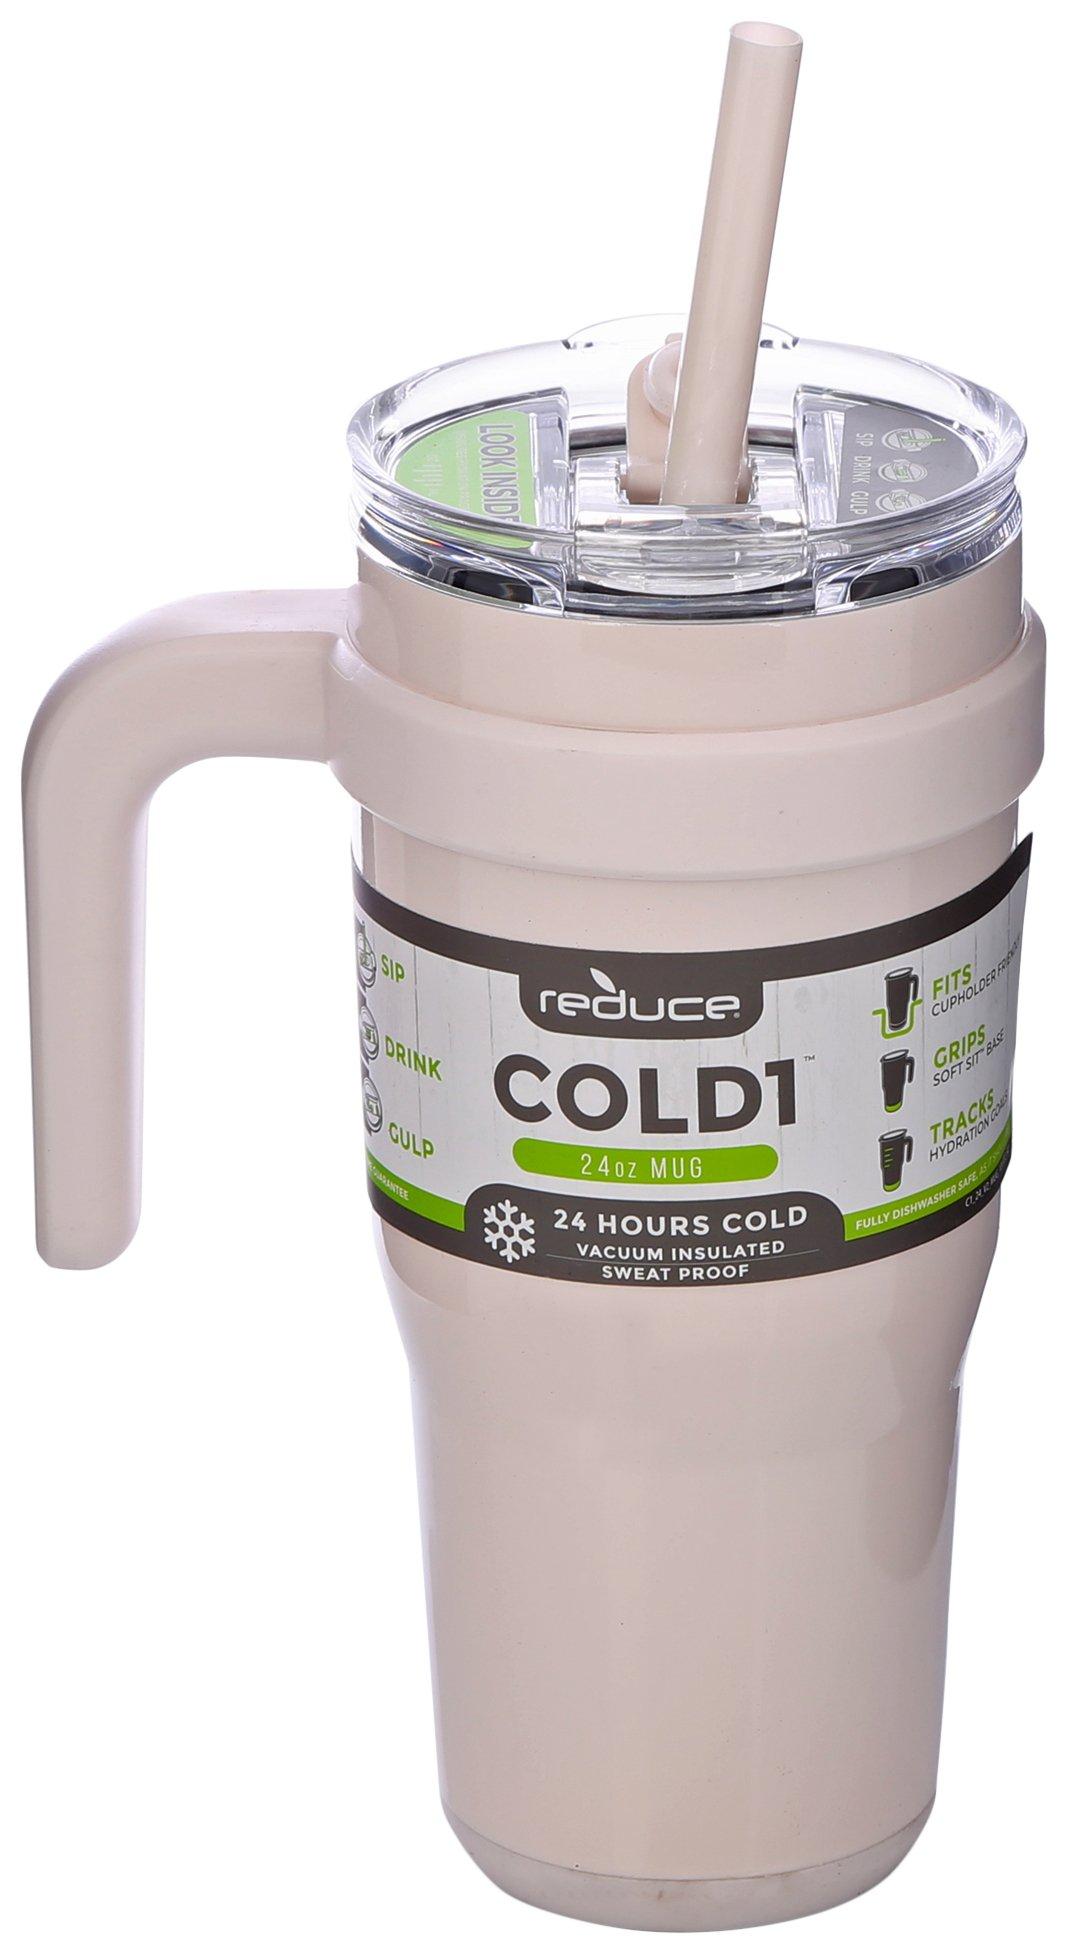 Reduce Cold-1 24oz Insulated Mug with Straw and Lid 24 Hours Cold, Sweat-proof Body, White